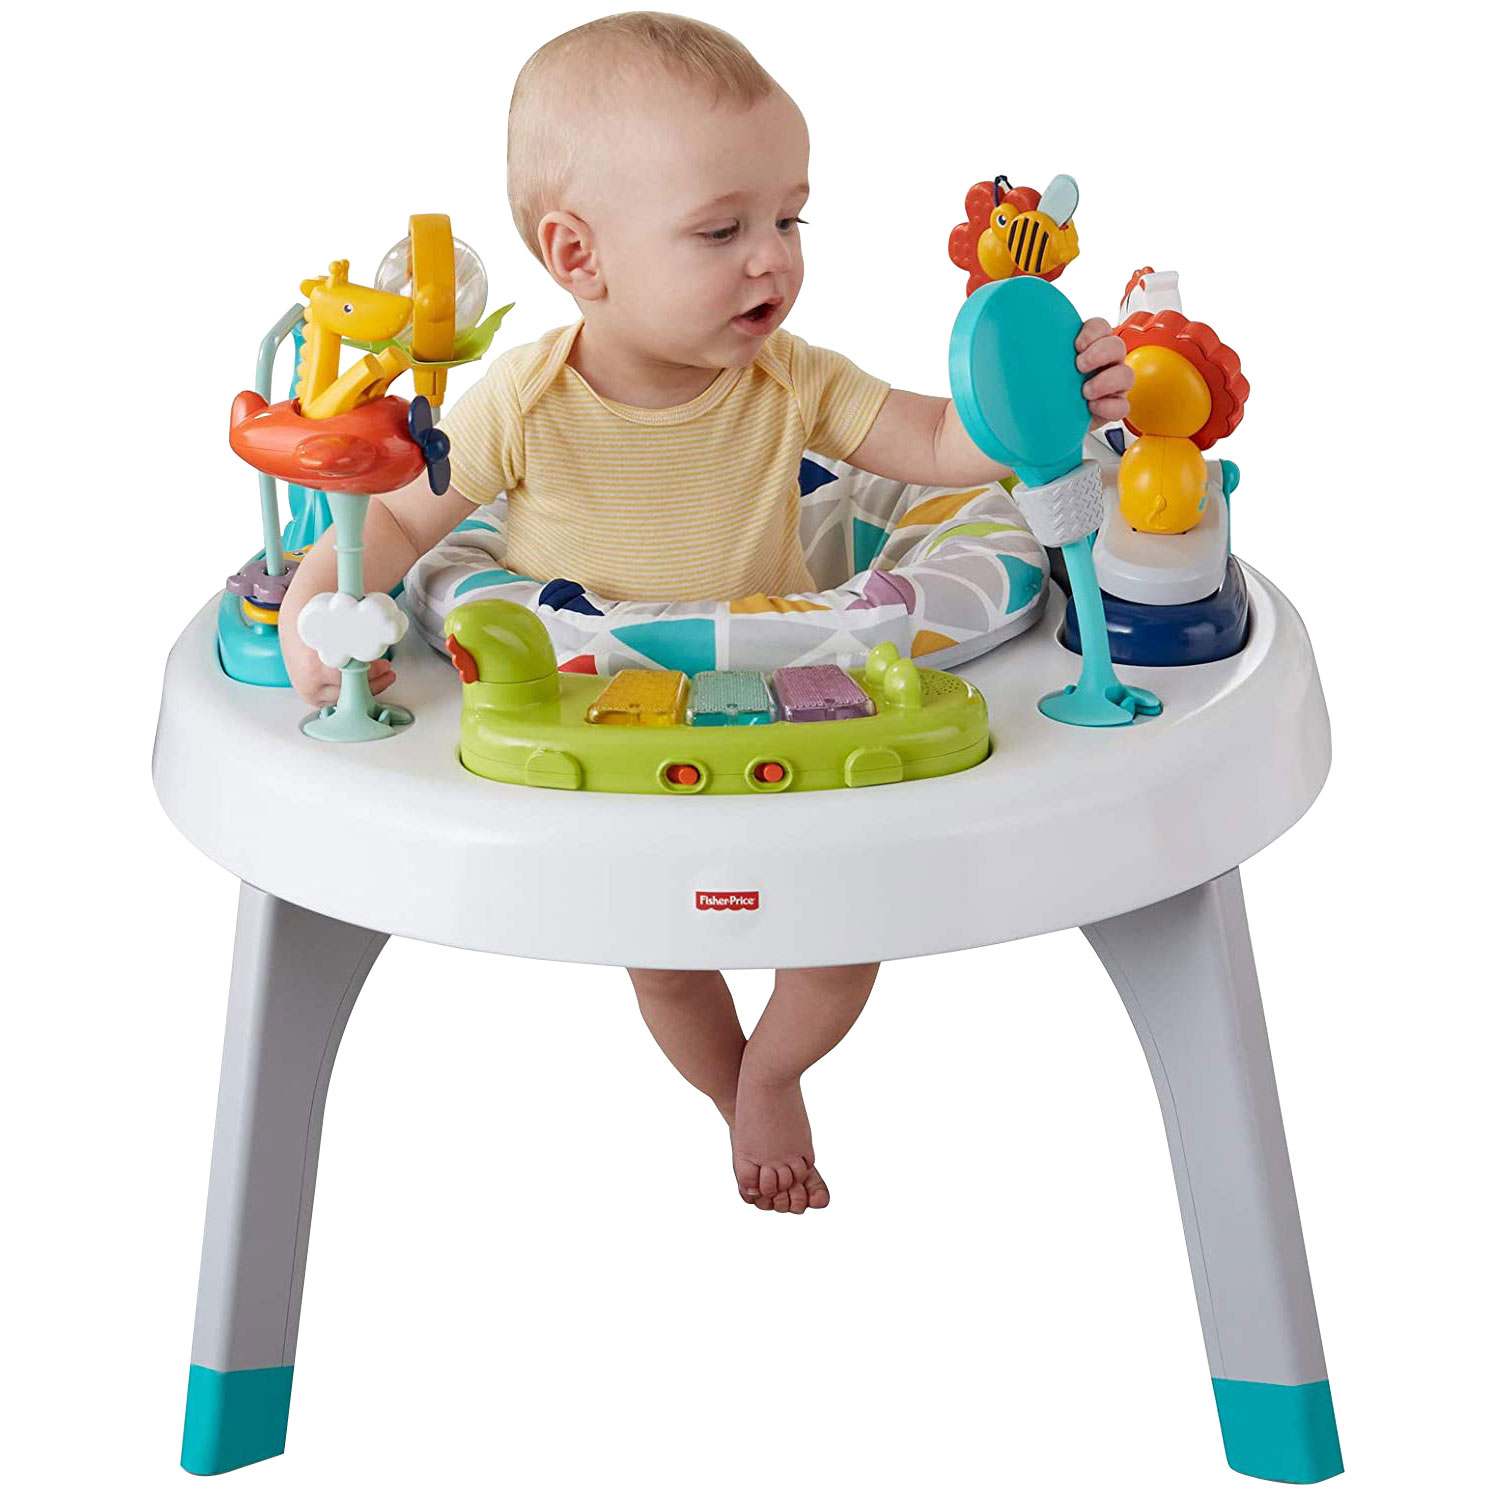 Fisher-Price 2-in-1 Sit-to-Stand Activity Centre - gift idea